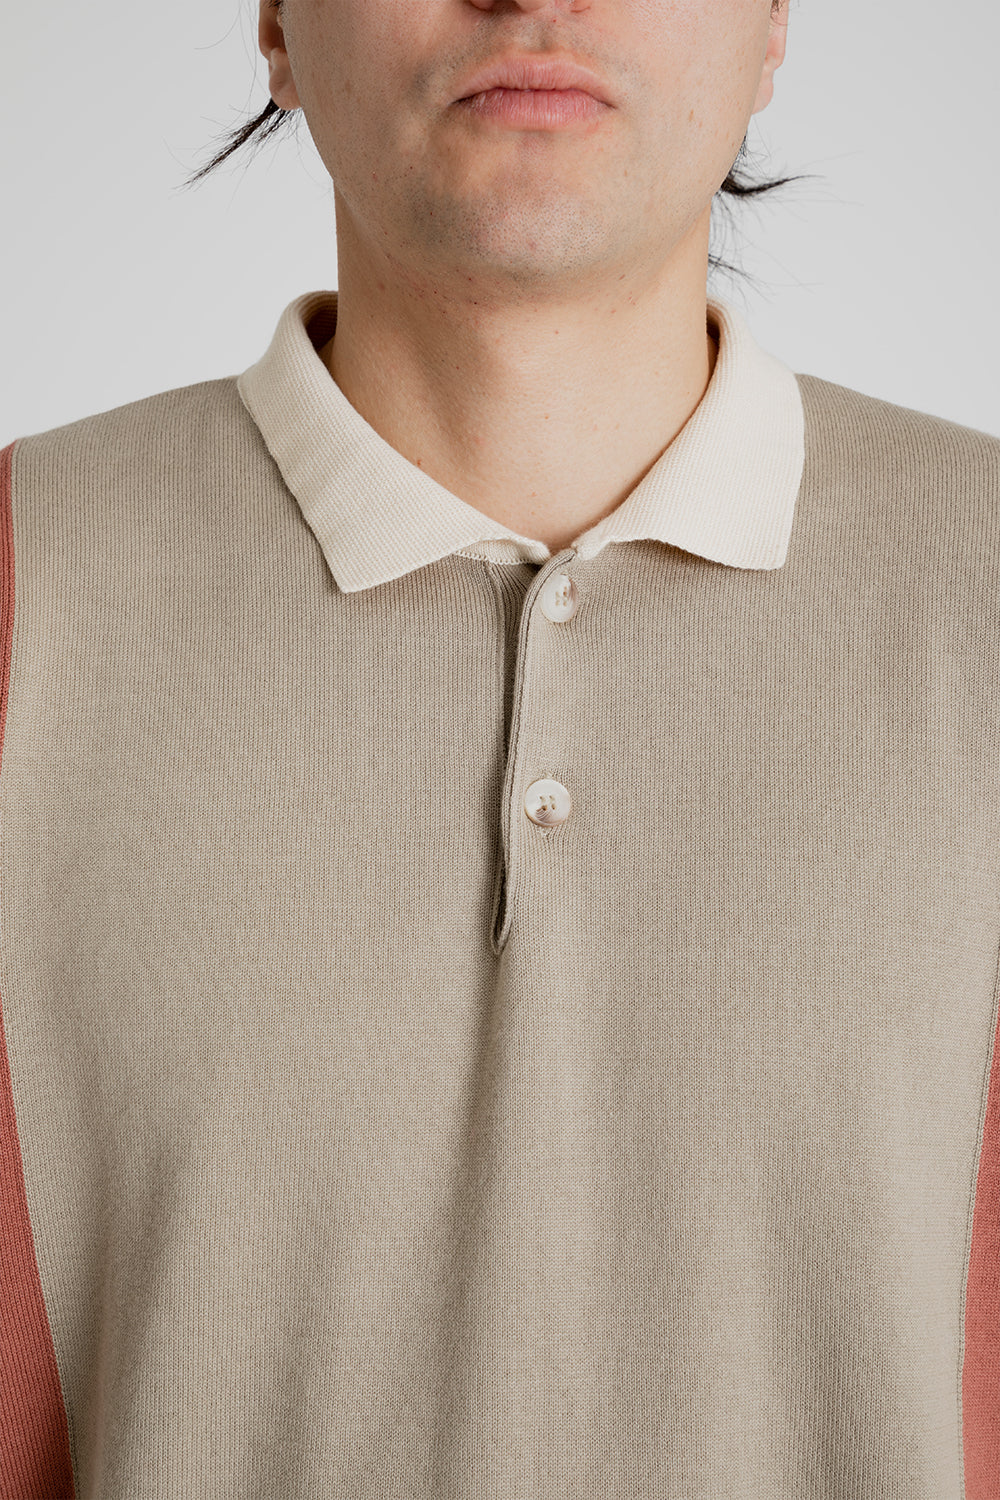 Foret Golf Polo Knit in Cloud/Brick